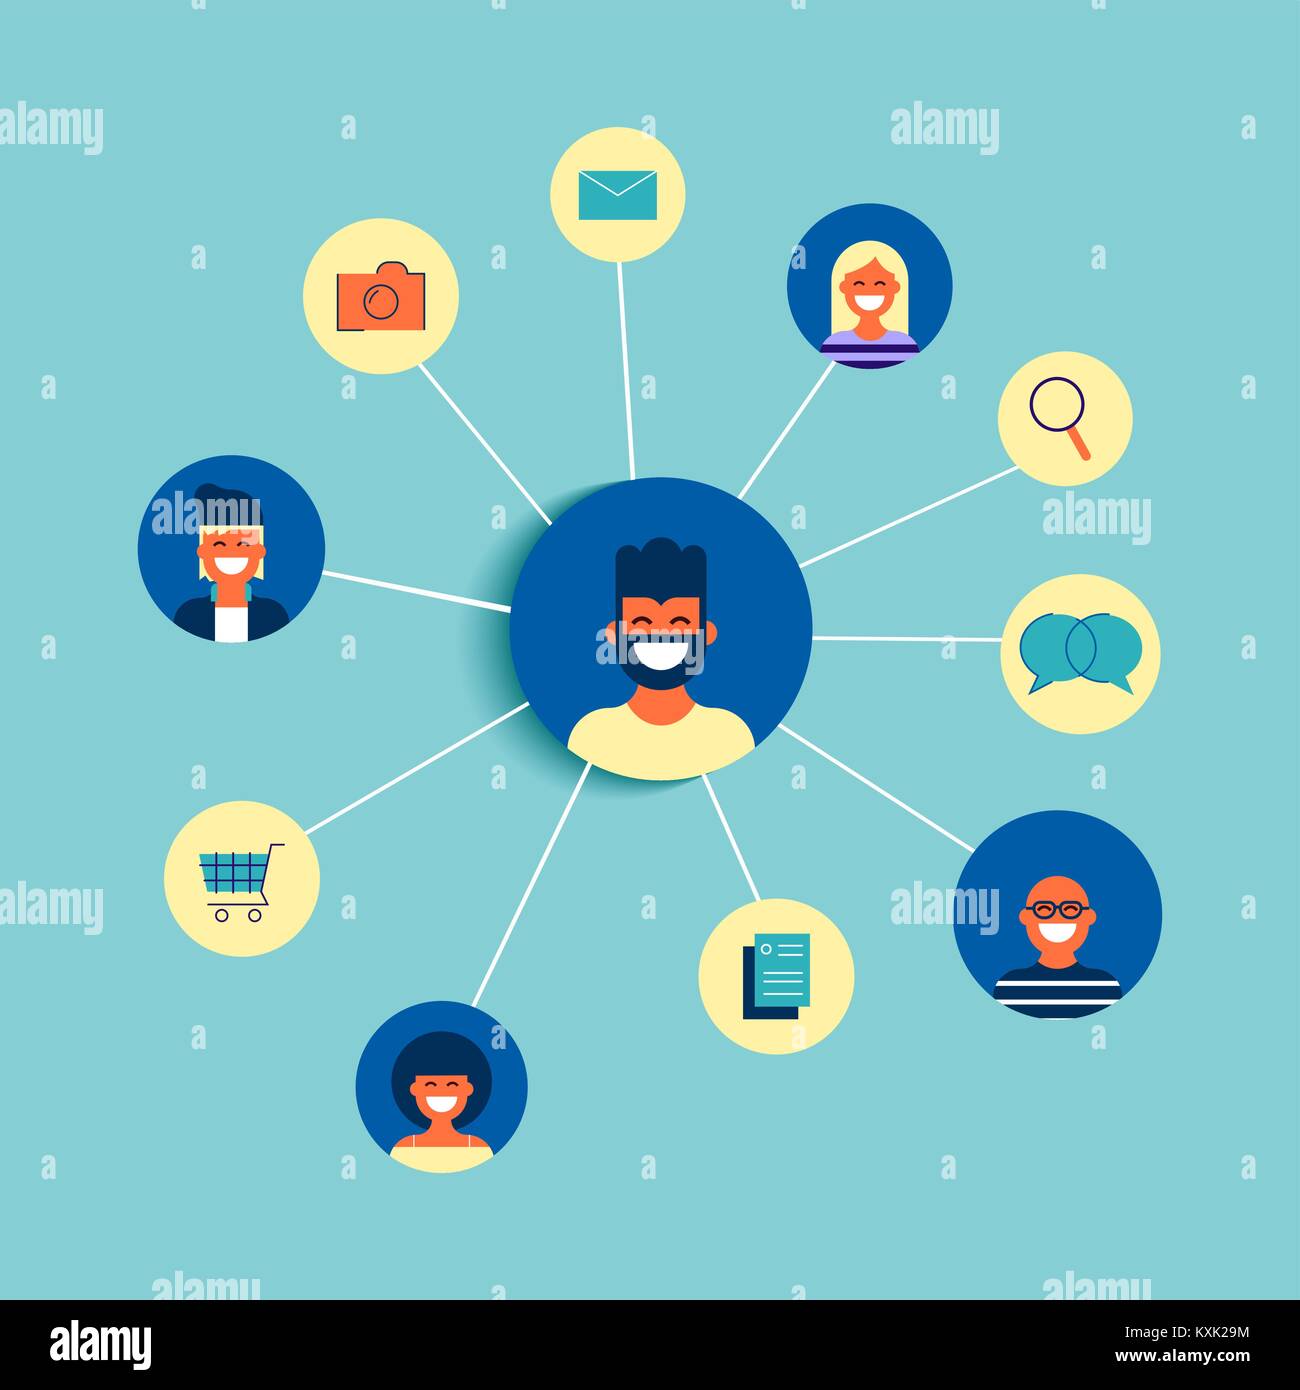 Social network connection concept illustration. Team of diverse people online doing internet activity connected to each other. EPS10 vector. Stock Vector